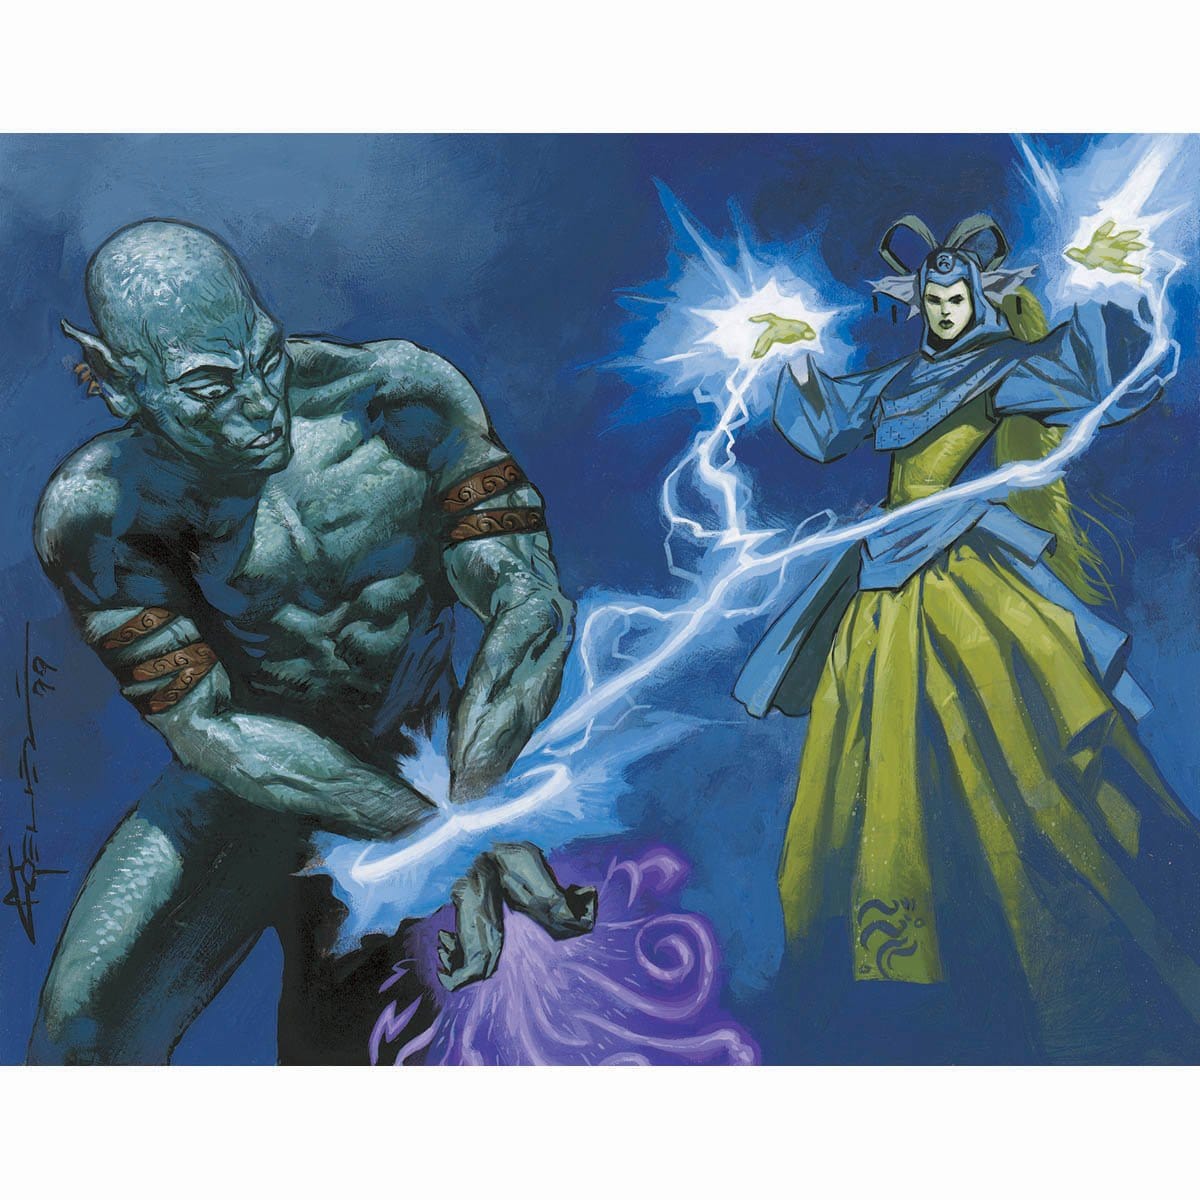 Thwart Print - Print - Original Magic Art - Accessories for Magic the Gathering and other card games